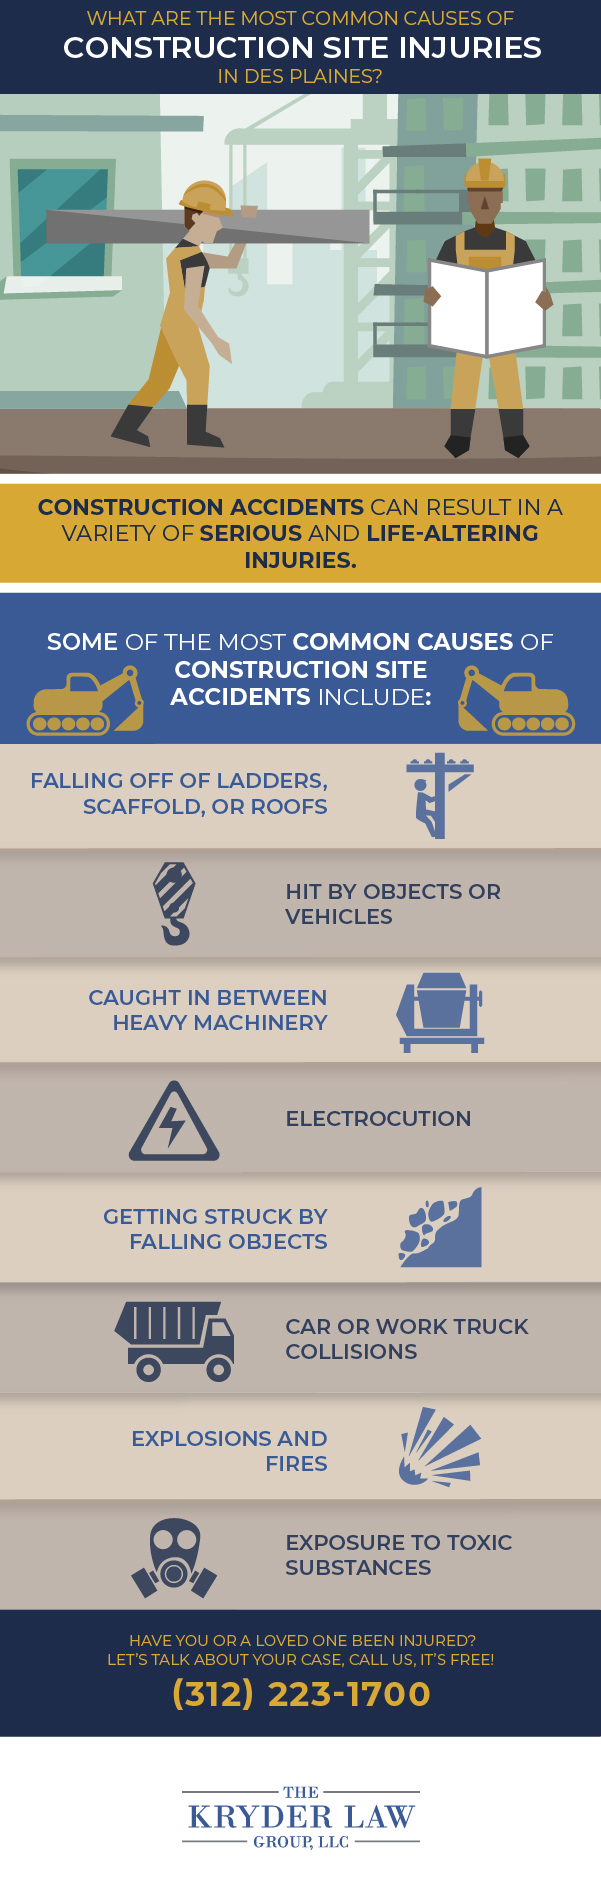 What Are The Most Common Causes of Construction Site Injuries in Des Plaines?